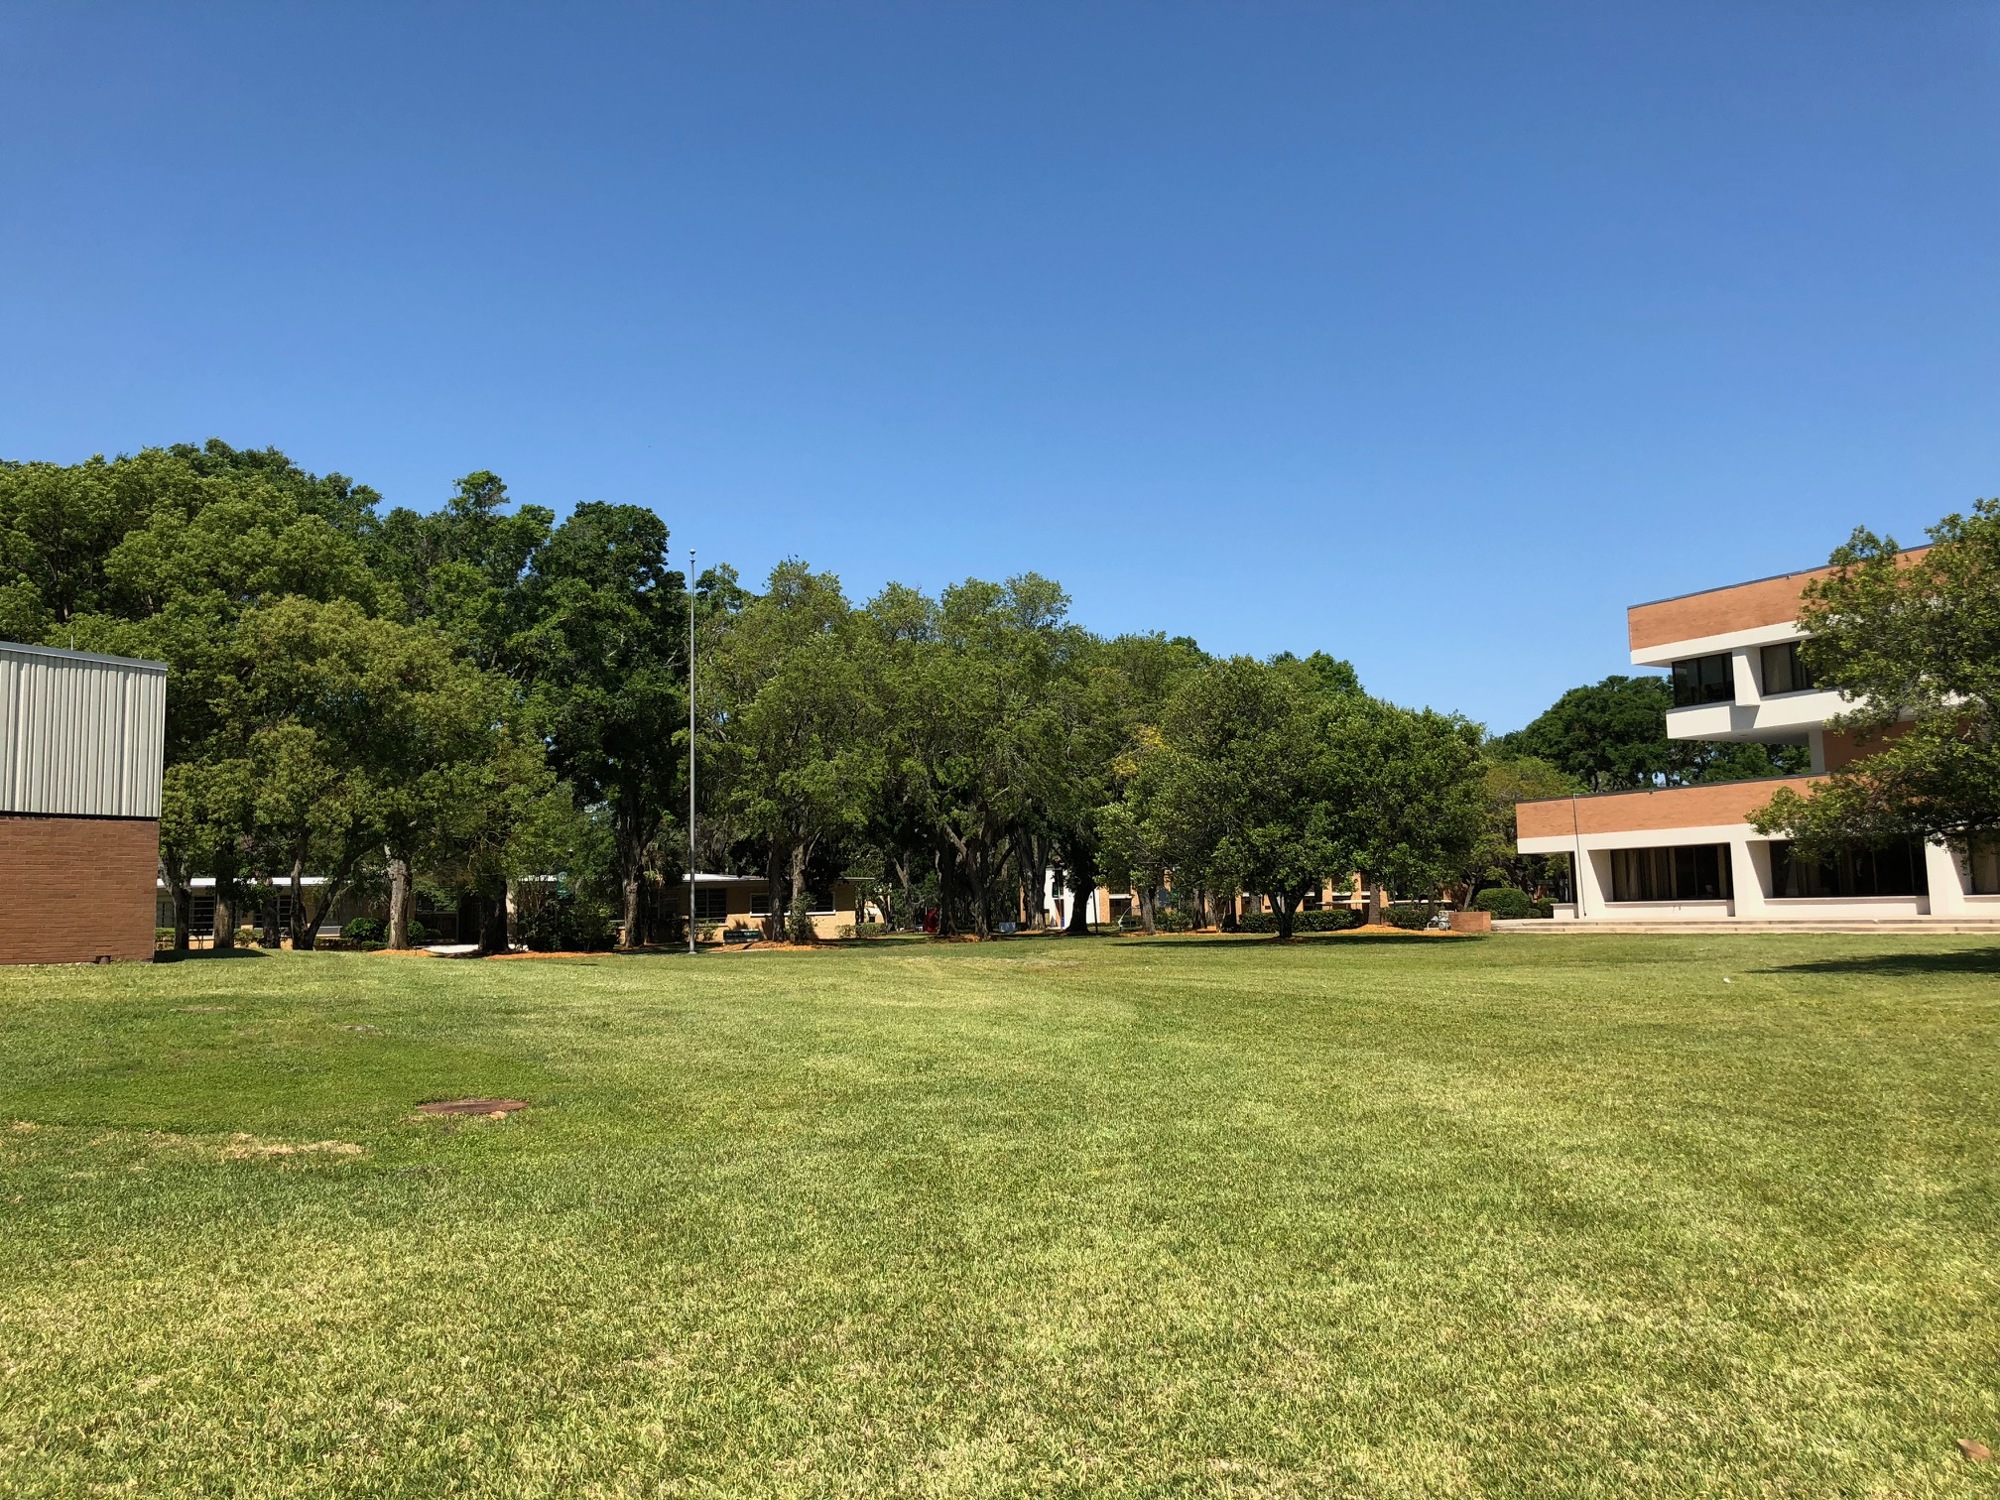 The $4 million, 12,000-square-foot Welcome Center is planned between the J. Arthur Howard Administration Building (right) and the J. Henry Gooding Building at the Arlington campus at 2800 University Blvd. N.